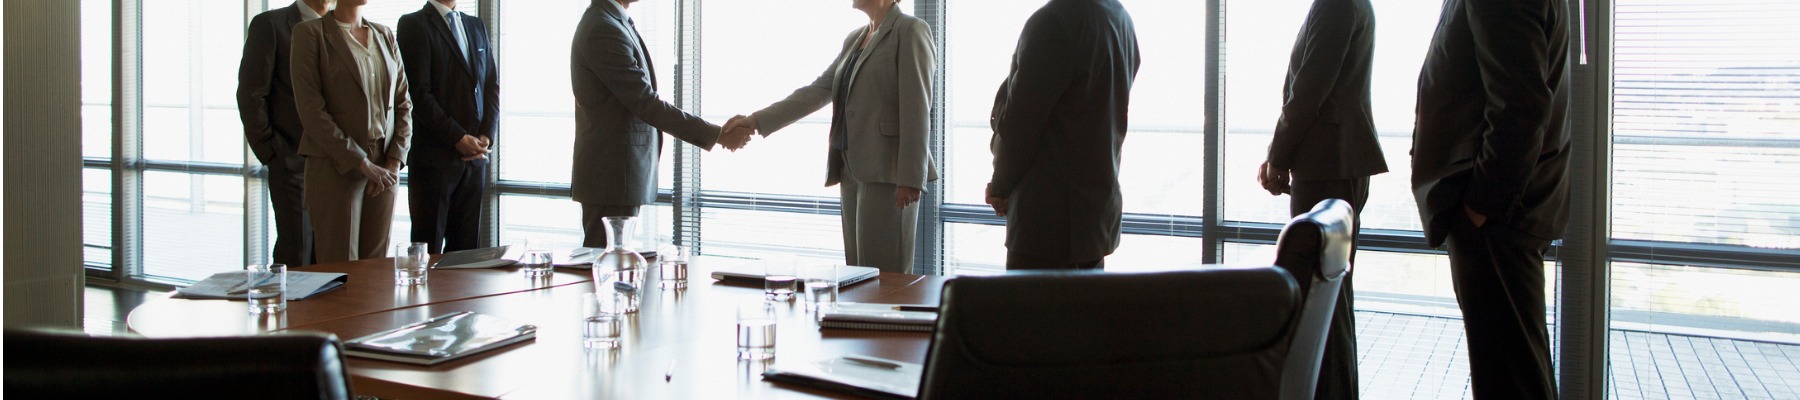 business-people-shaking-hands-in-conference-room 1800x400